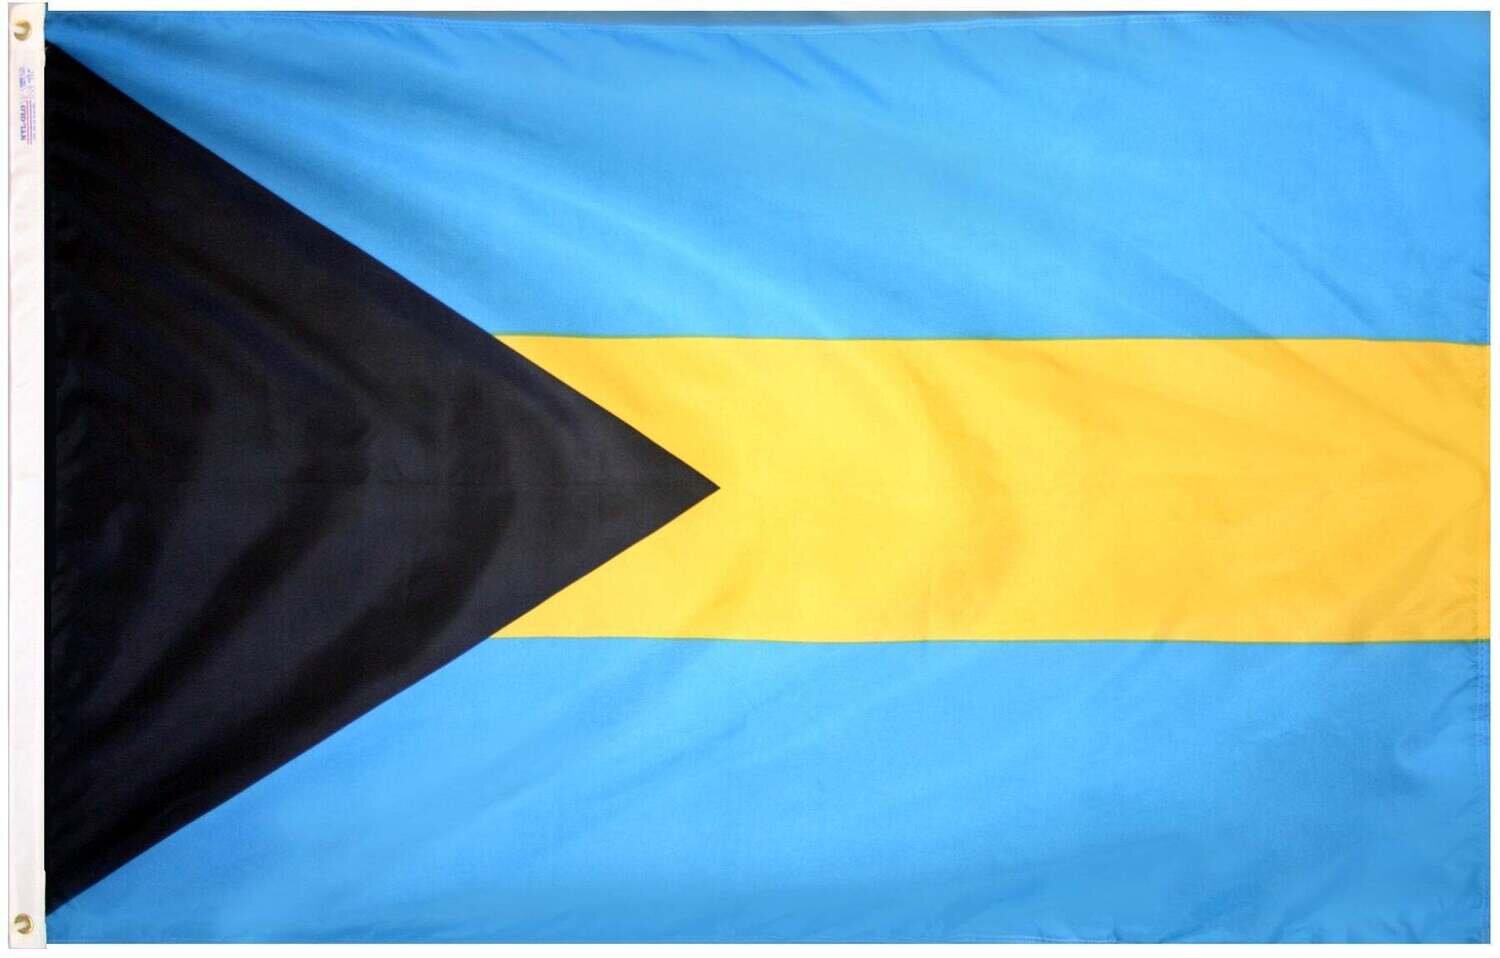 Bahamas Flag 3x5 ft. Nylon SolarGuard Nyl-Glo 100% Made in USA to Official United Nations Design Specifications.